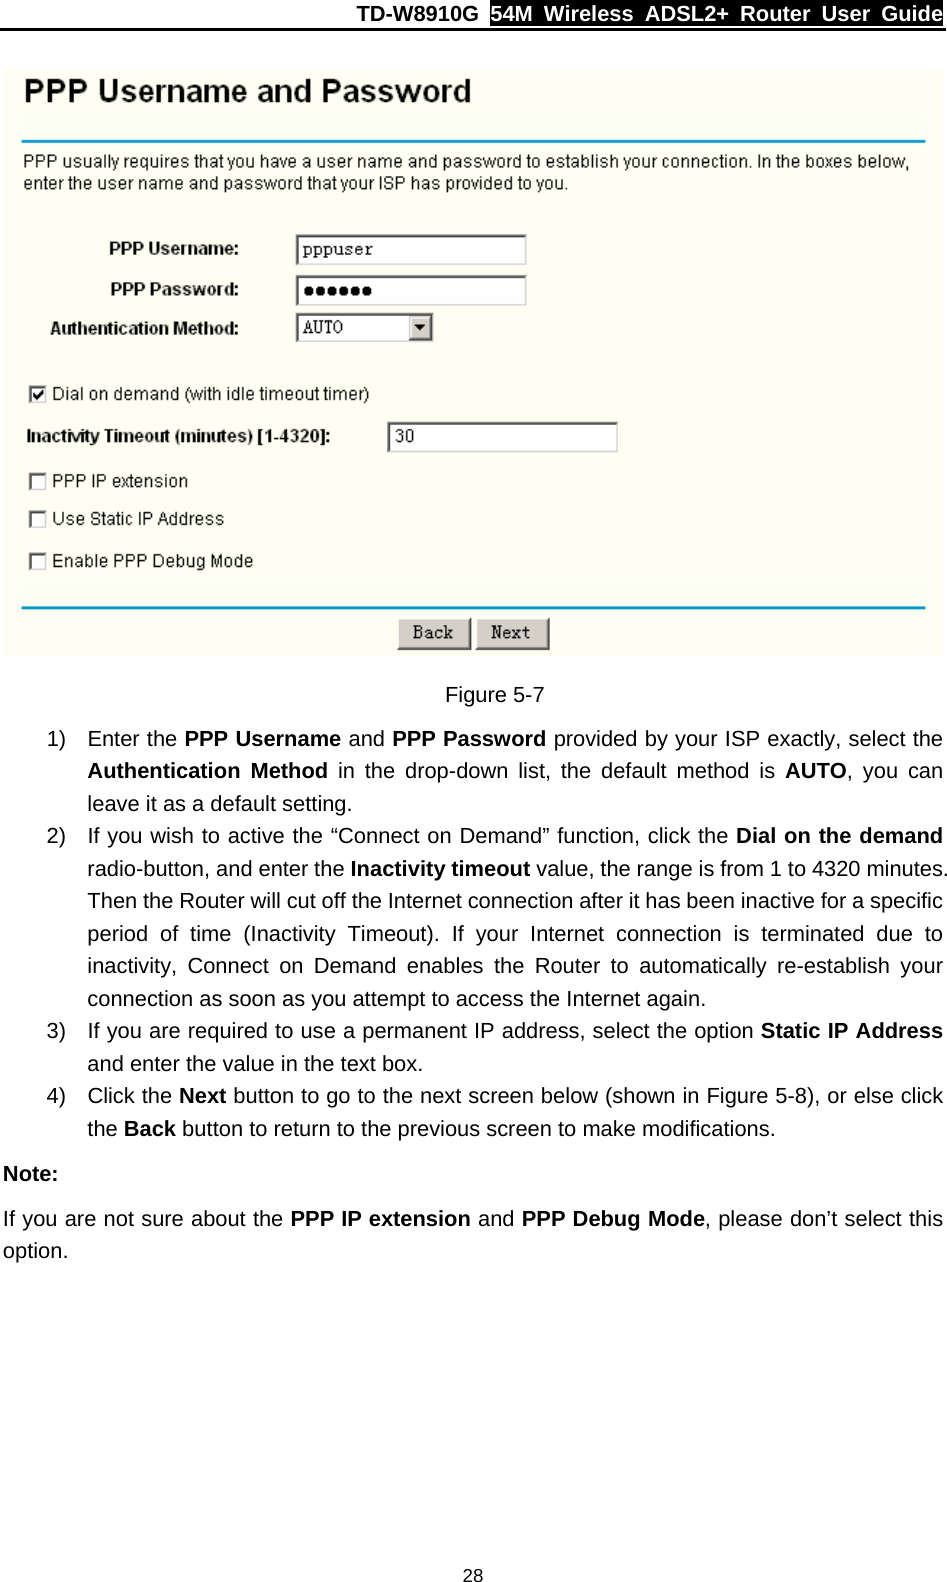 TD-W8910G  54M Wireless ADSL2+ Router User Guide  28 Figure 5-7 1) Enter the PPP Username and PPP Password provided by your ISP exactly, select the Authentication Method in the drop-down list, the default method is AUTO, you can leave it as a default setting. 2)  If you wish to active the “Connect on Demand” function, click the Dial on the demand radio-button, and enter the Inactivity timeout value, the range is from 1 to 4320 minutes. Then the Router will cut off the Internet connection after it has been inactive for a specific period of time (Inactivity Timeout). If your Internet connection is terminated due to inactivity, Connect on Demand enables the Router to automatically re-establish your connection as soon as you attempt to access the Internet again. 3)  If you are required to use a permanent IP address, select the option Static IP Address and enter the value in the text box. 4) Click the Next button to go to the next screen below (shown in Figure 5-8), or else click the Back button to return to the previous screen to make modifications. Note: If you are not sure about the PPP IP extension and PPP Debug Mode, please don’t select this option. 